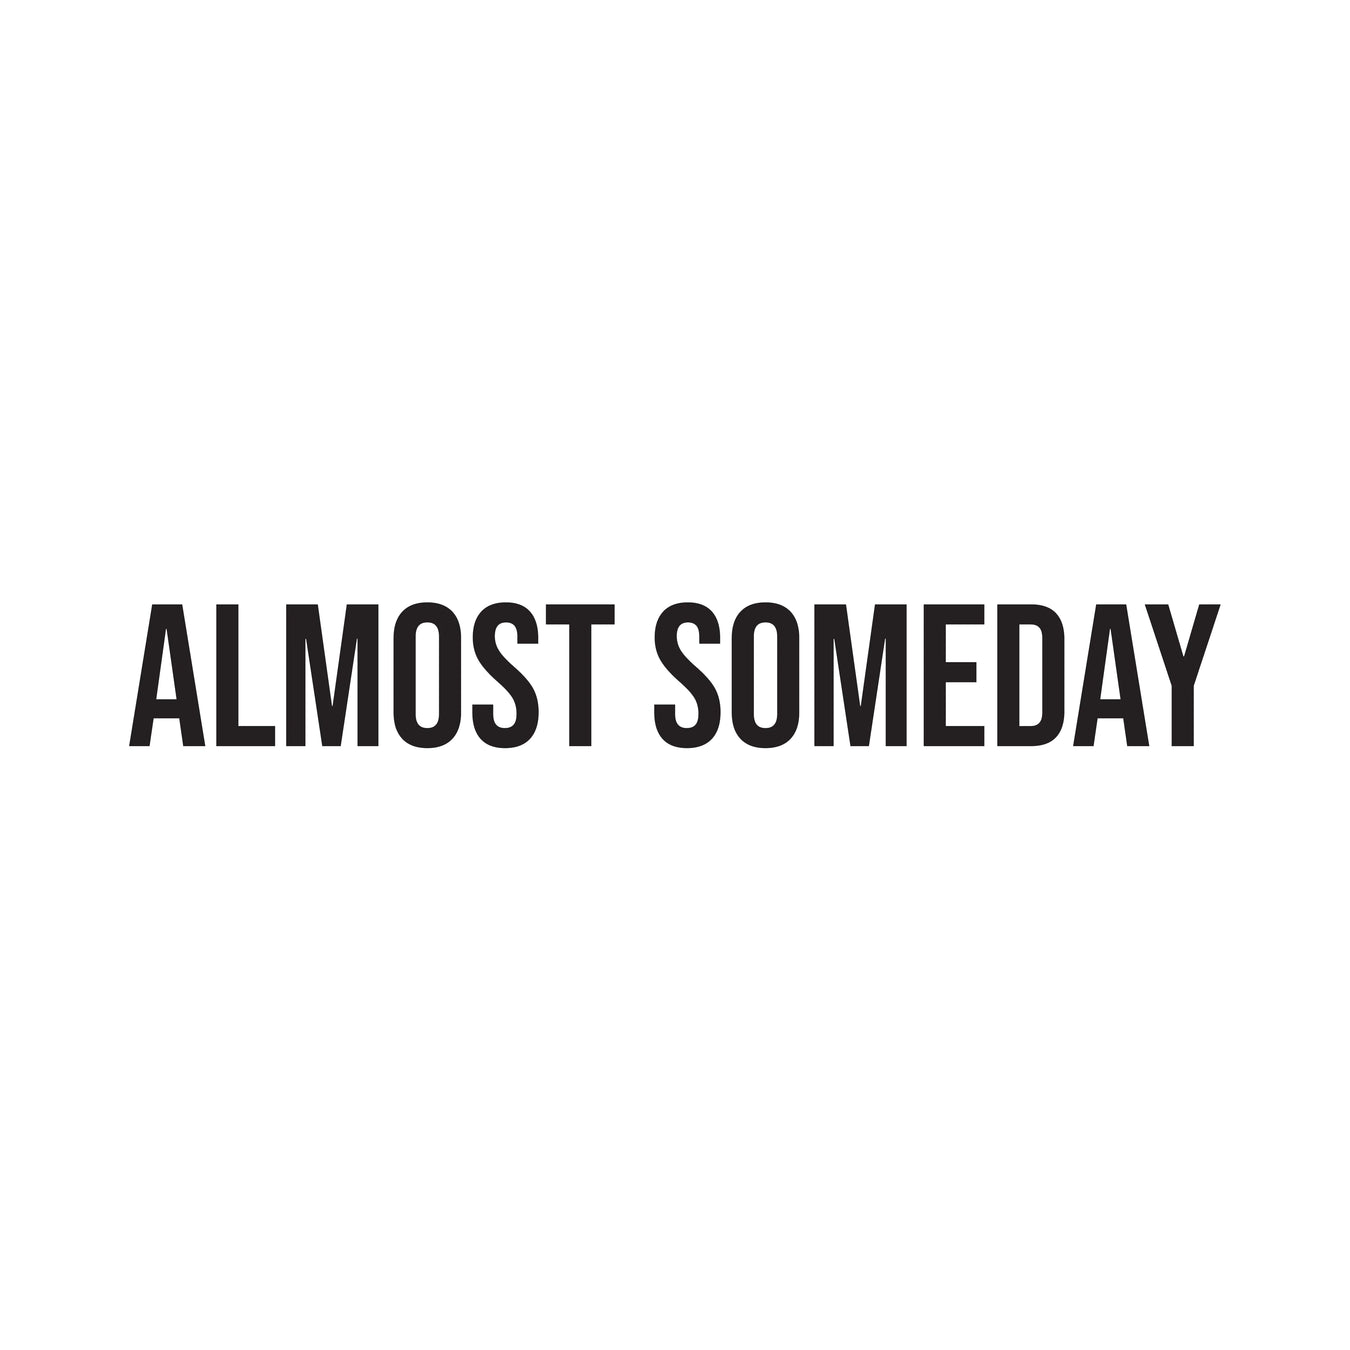 Almost Someday